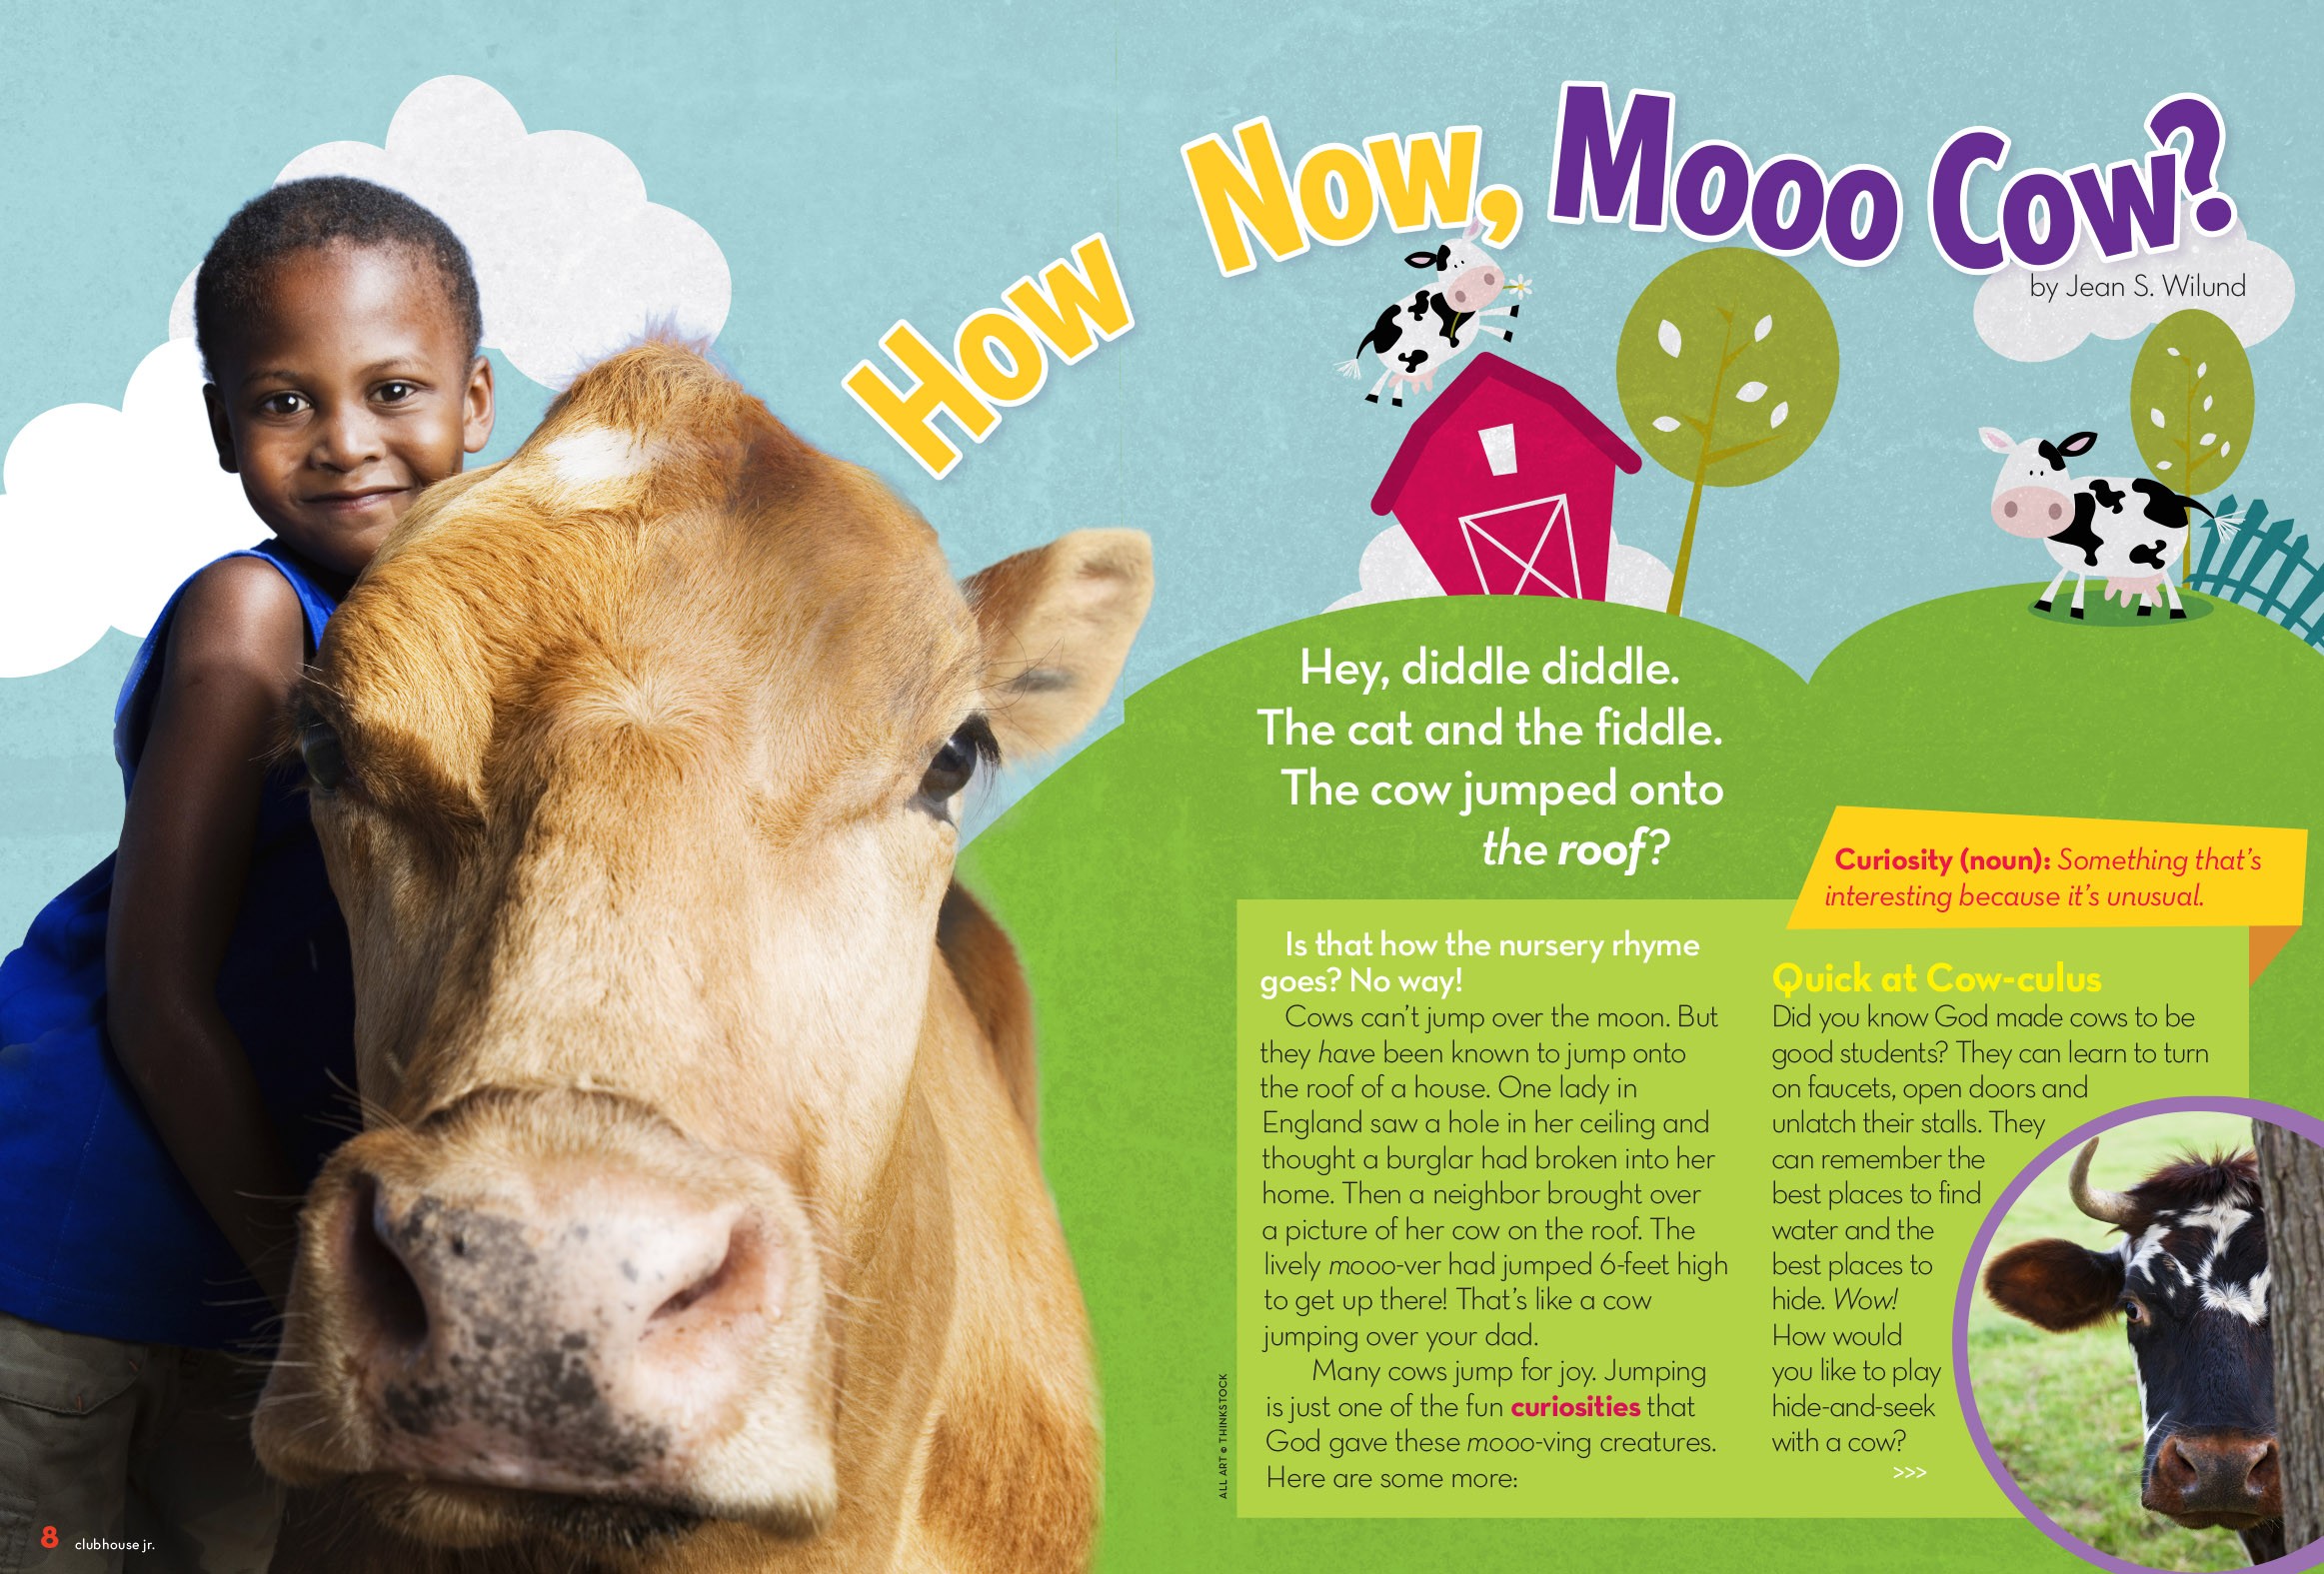 Fun facts about cows for kids "How Now, Mooo Cow?" by Jean Wilund (Clubhouse Jr Magazine)